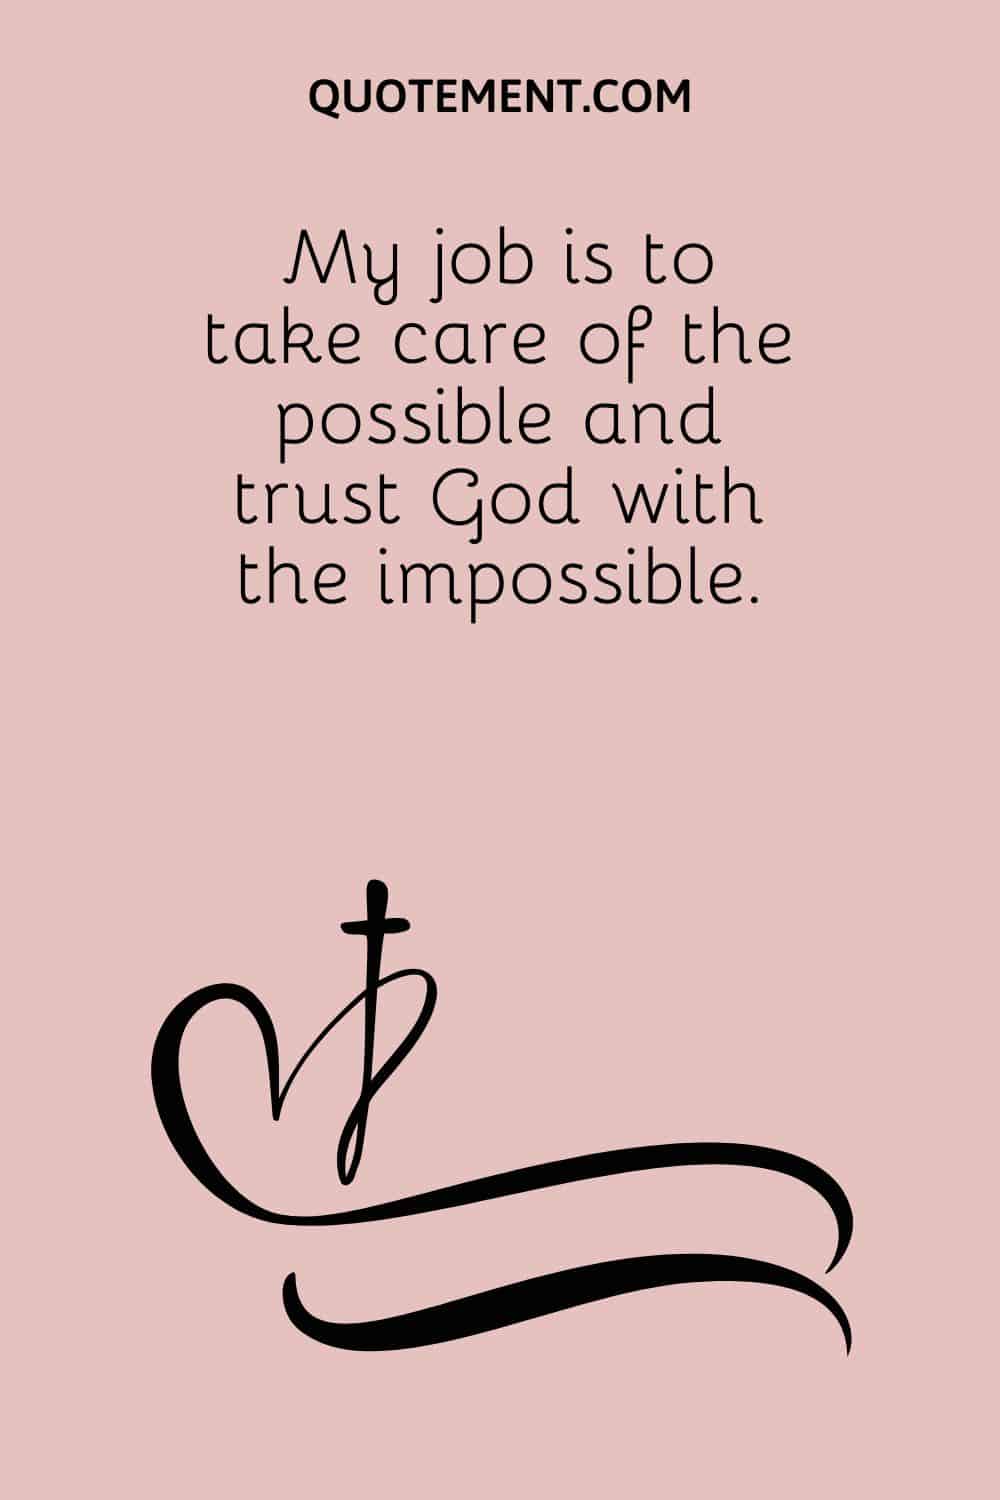 My job is to take care of the possible and trust God with the impossible